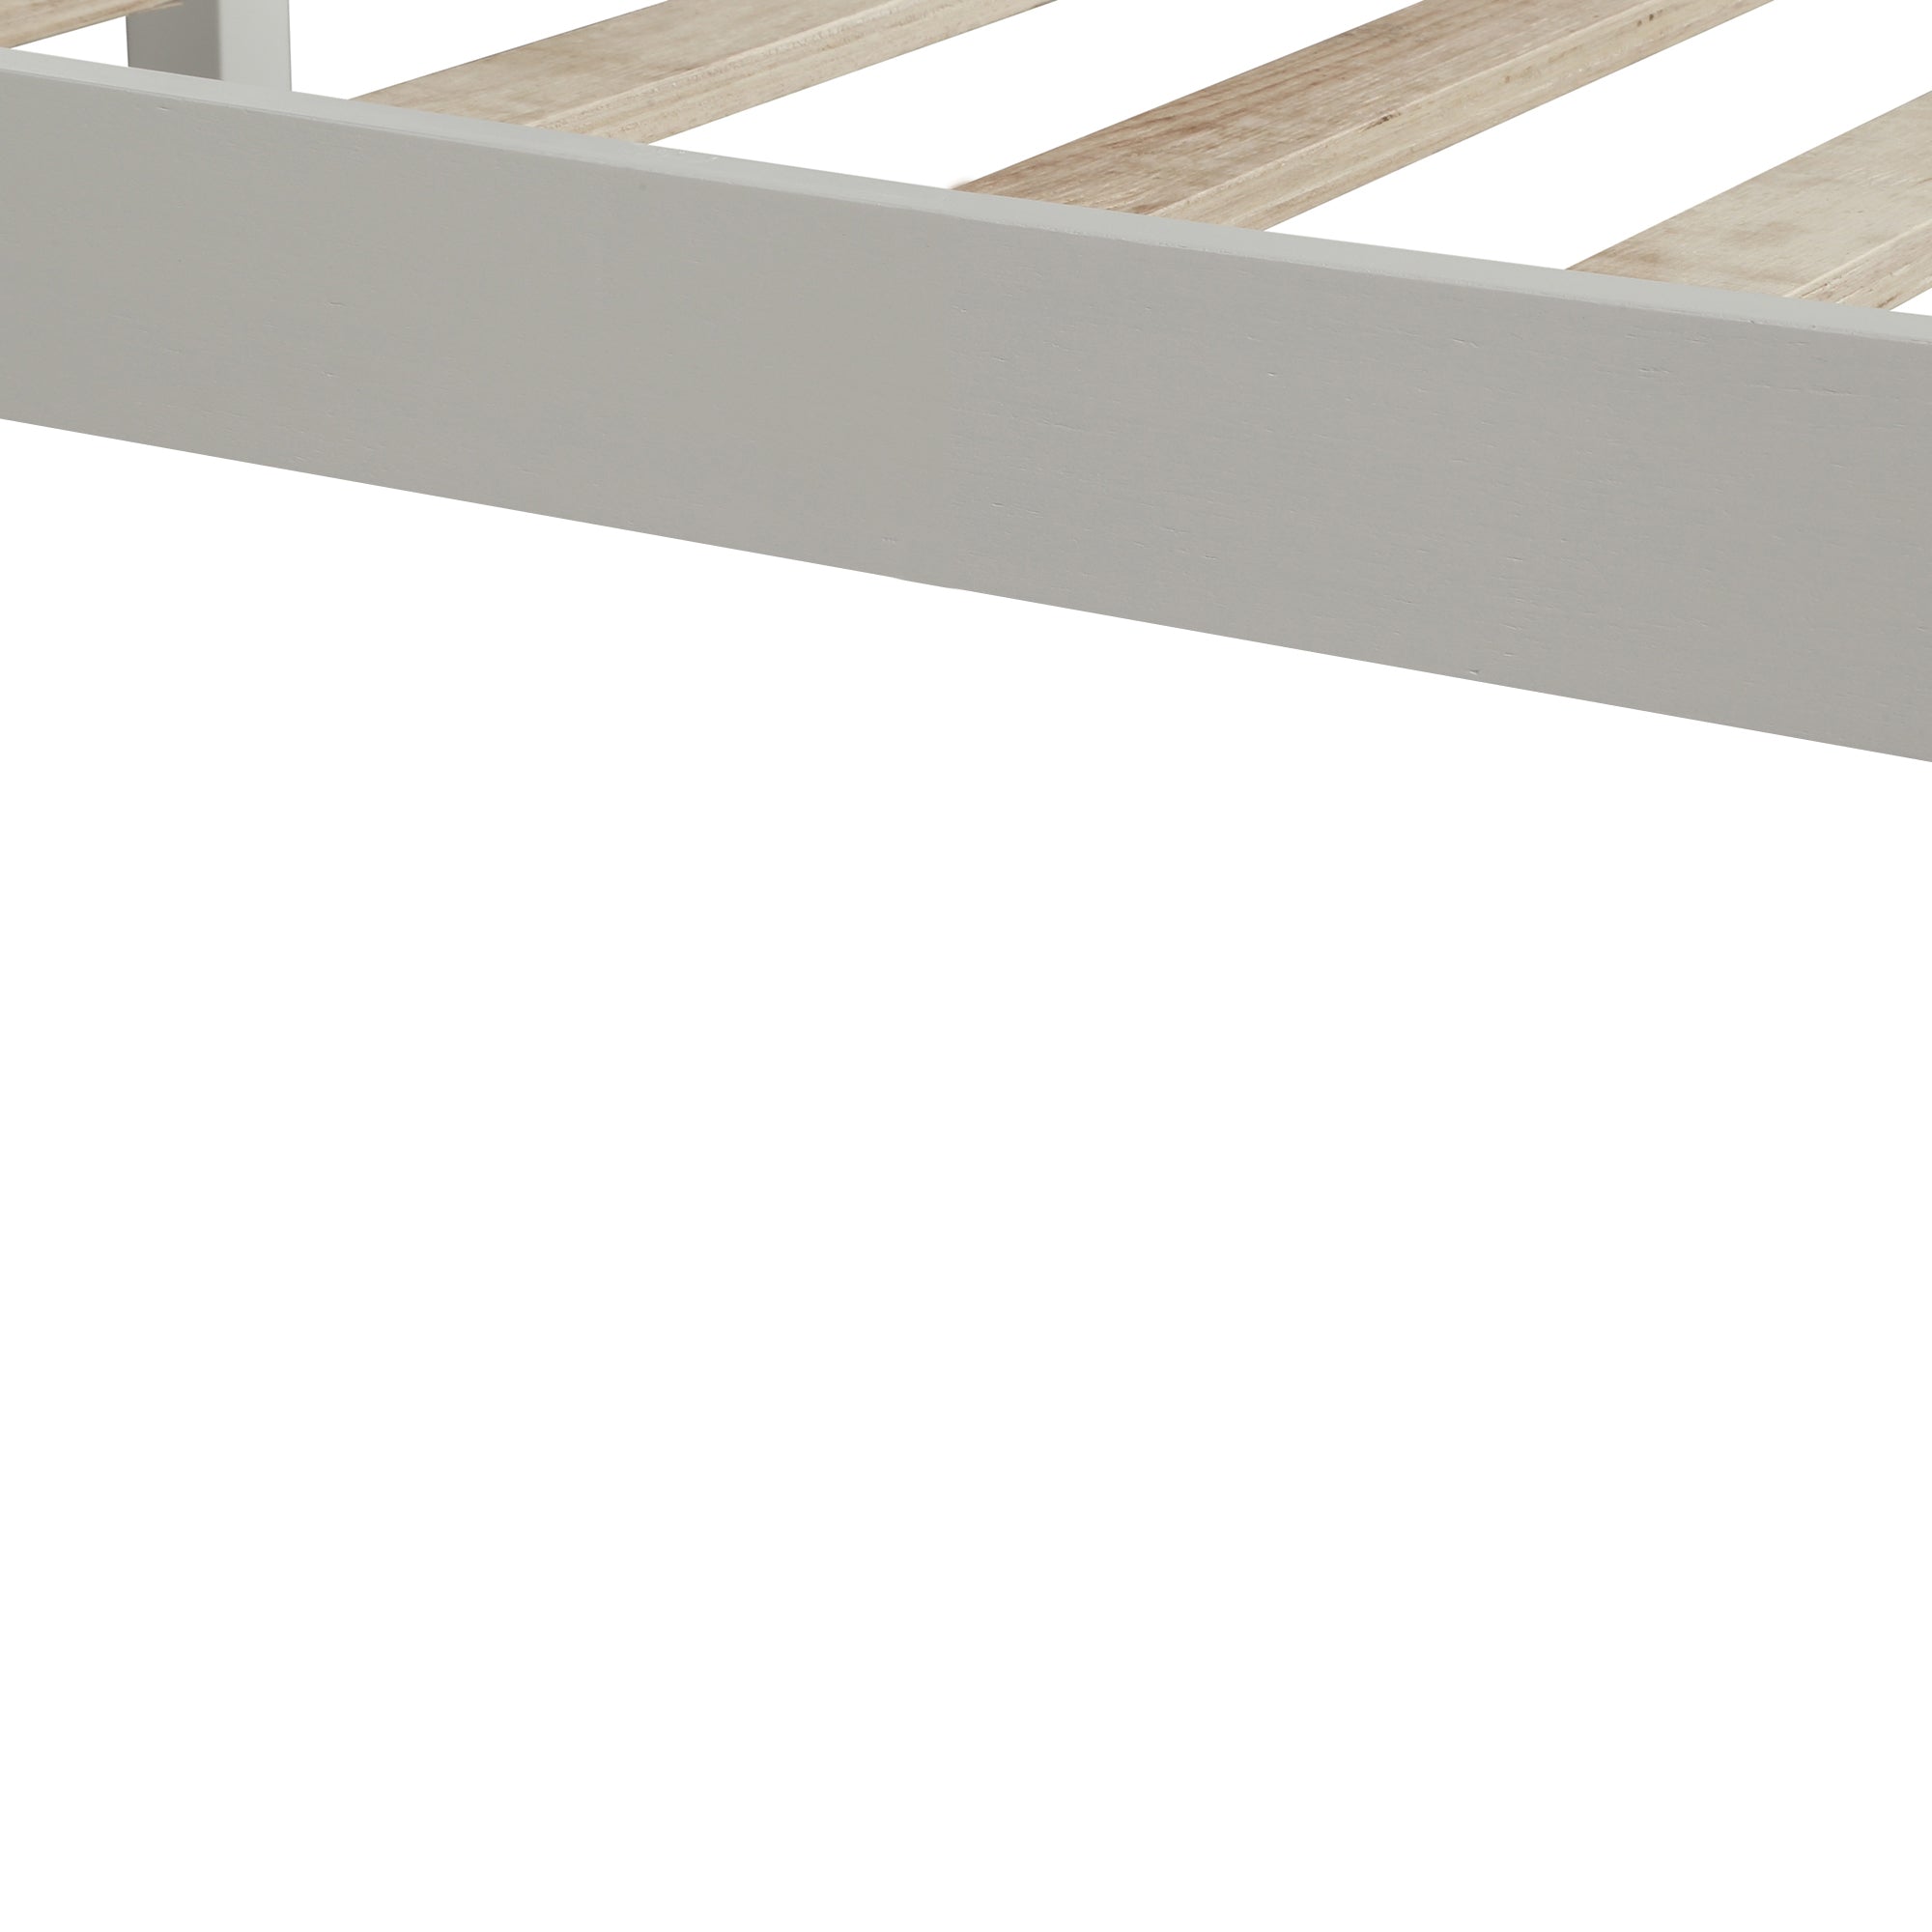 Queen Platform Bed Frame with Headboard | Wood Slat Support | No Box Spring Needed | White Finish